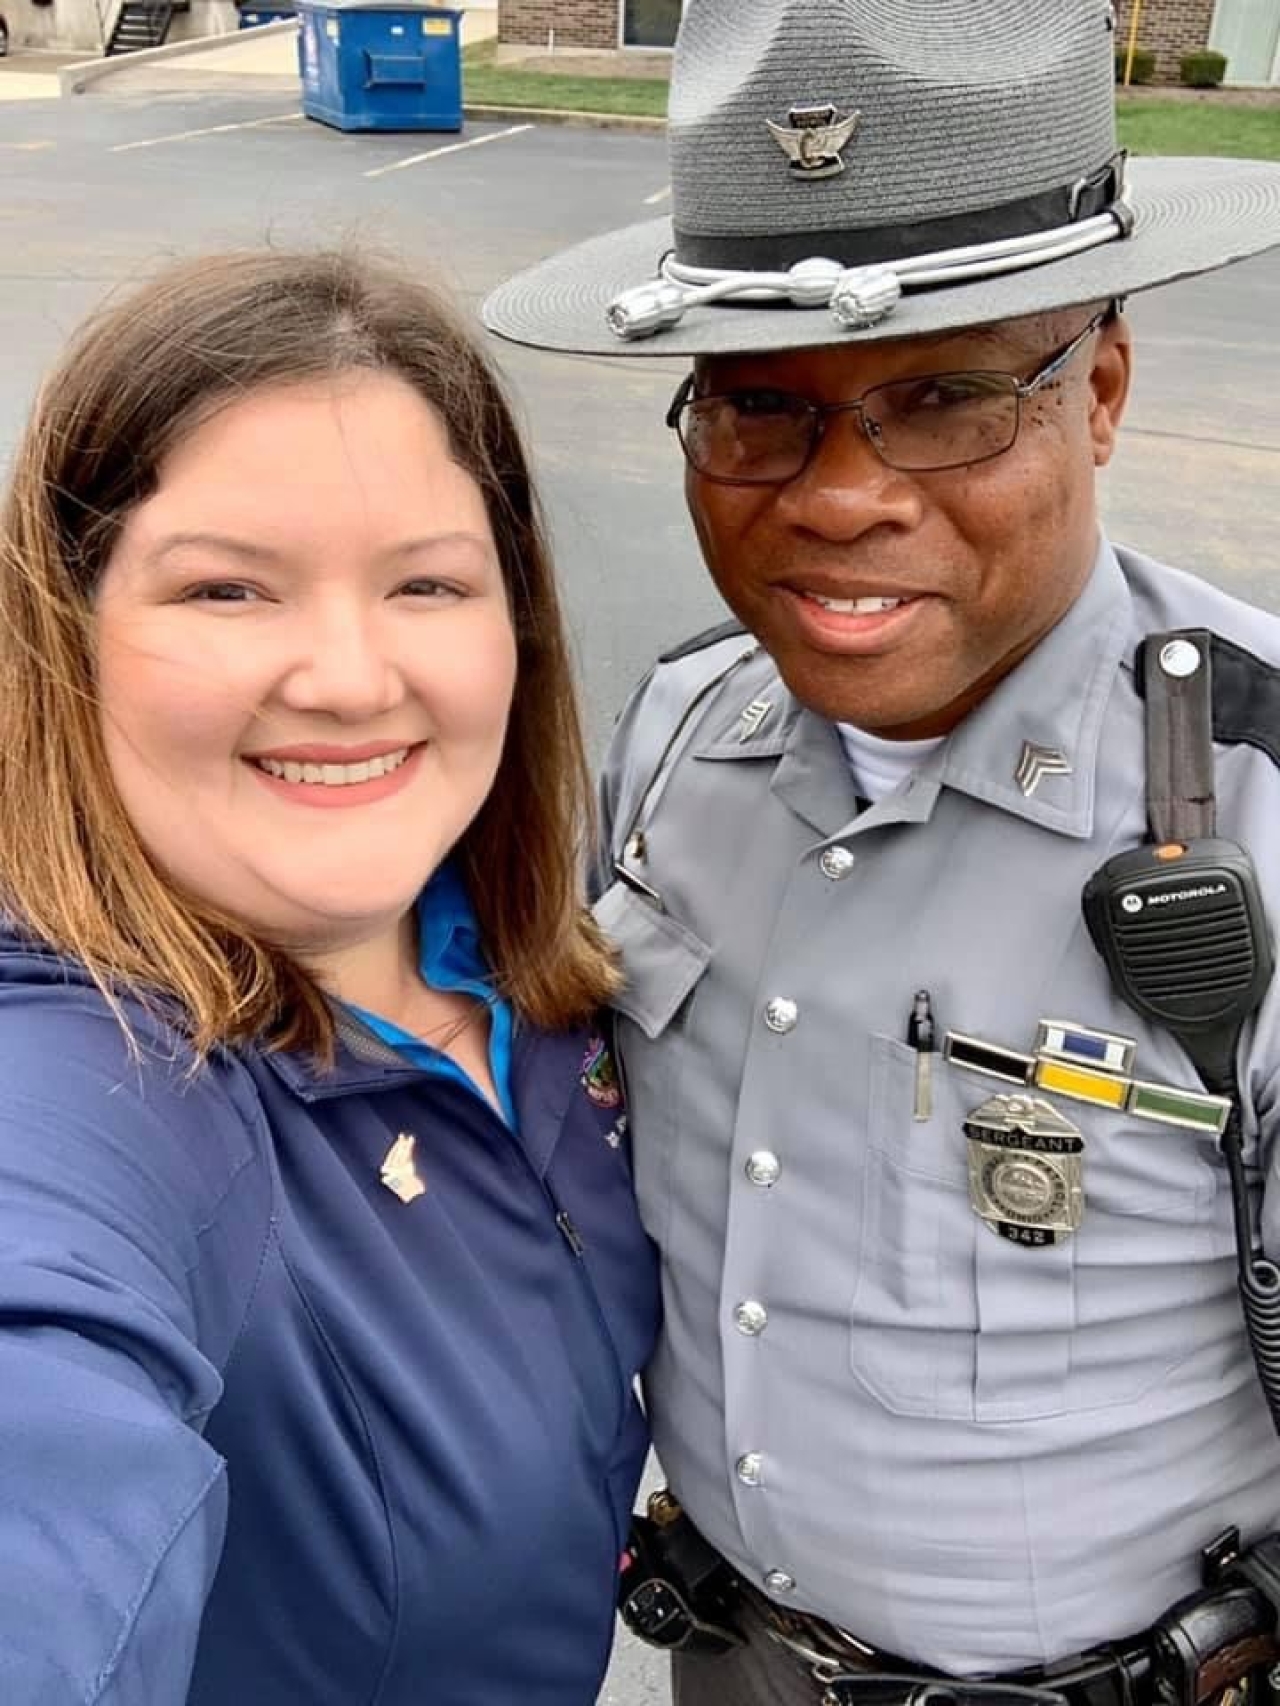 Rep. Miranda with an Ohio State Highway Patrol officer